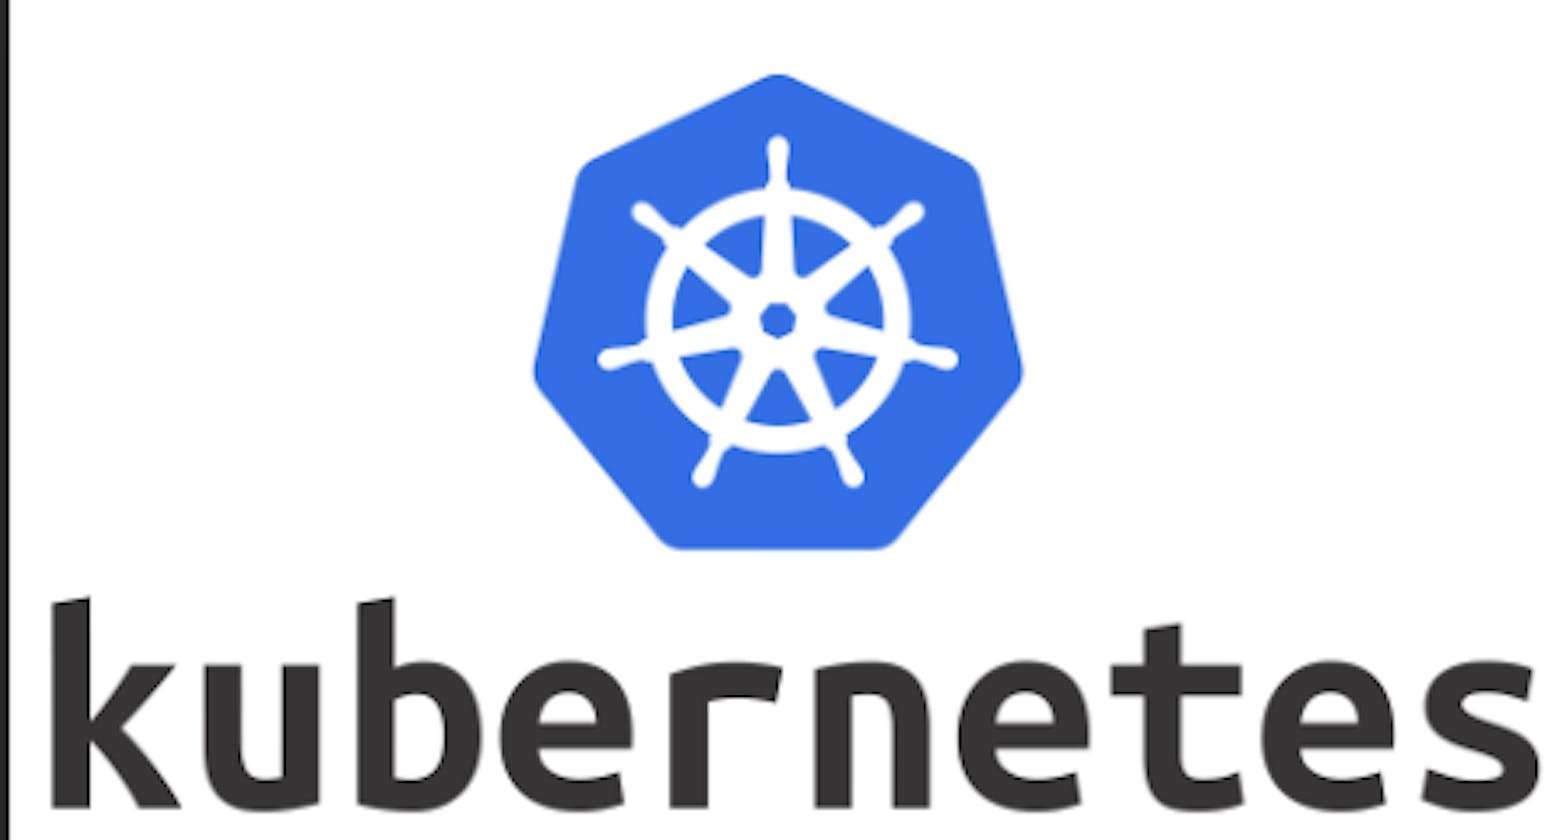 81 Kubernetes Errors You Should Know (and How to Fix Them)